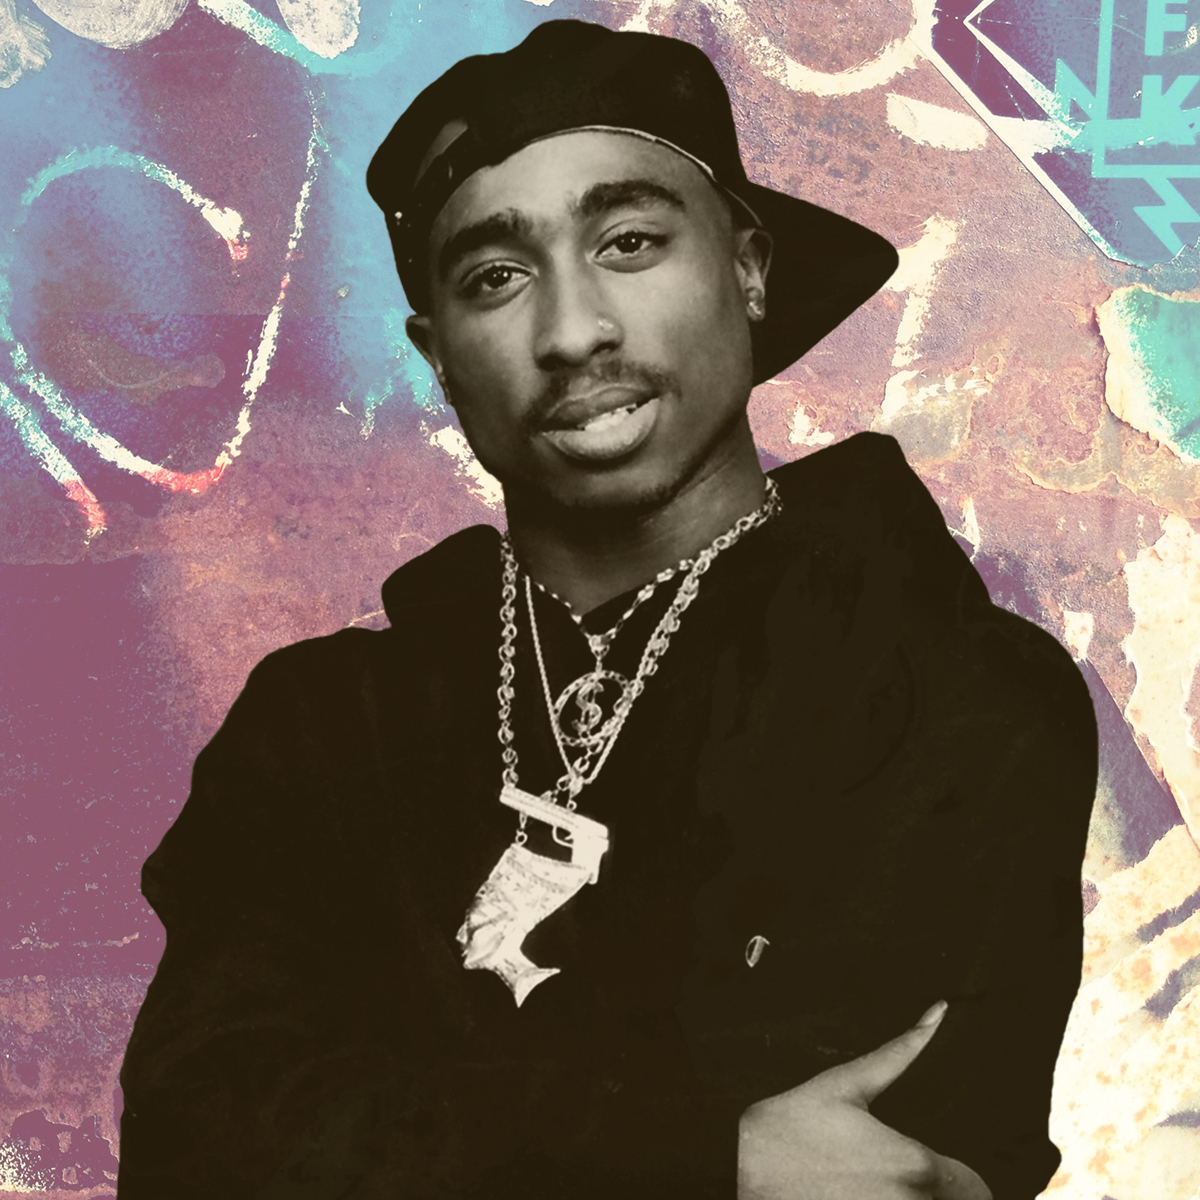 Two Decades Without Our - Image 1 from Tupac's 25 Most Infamous Moments